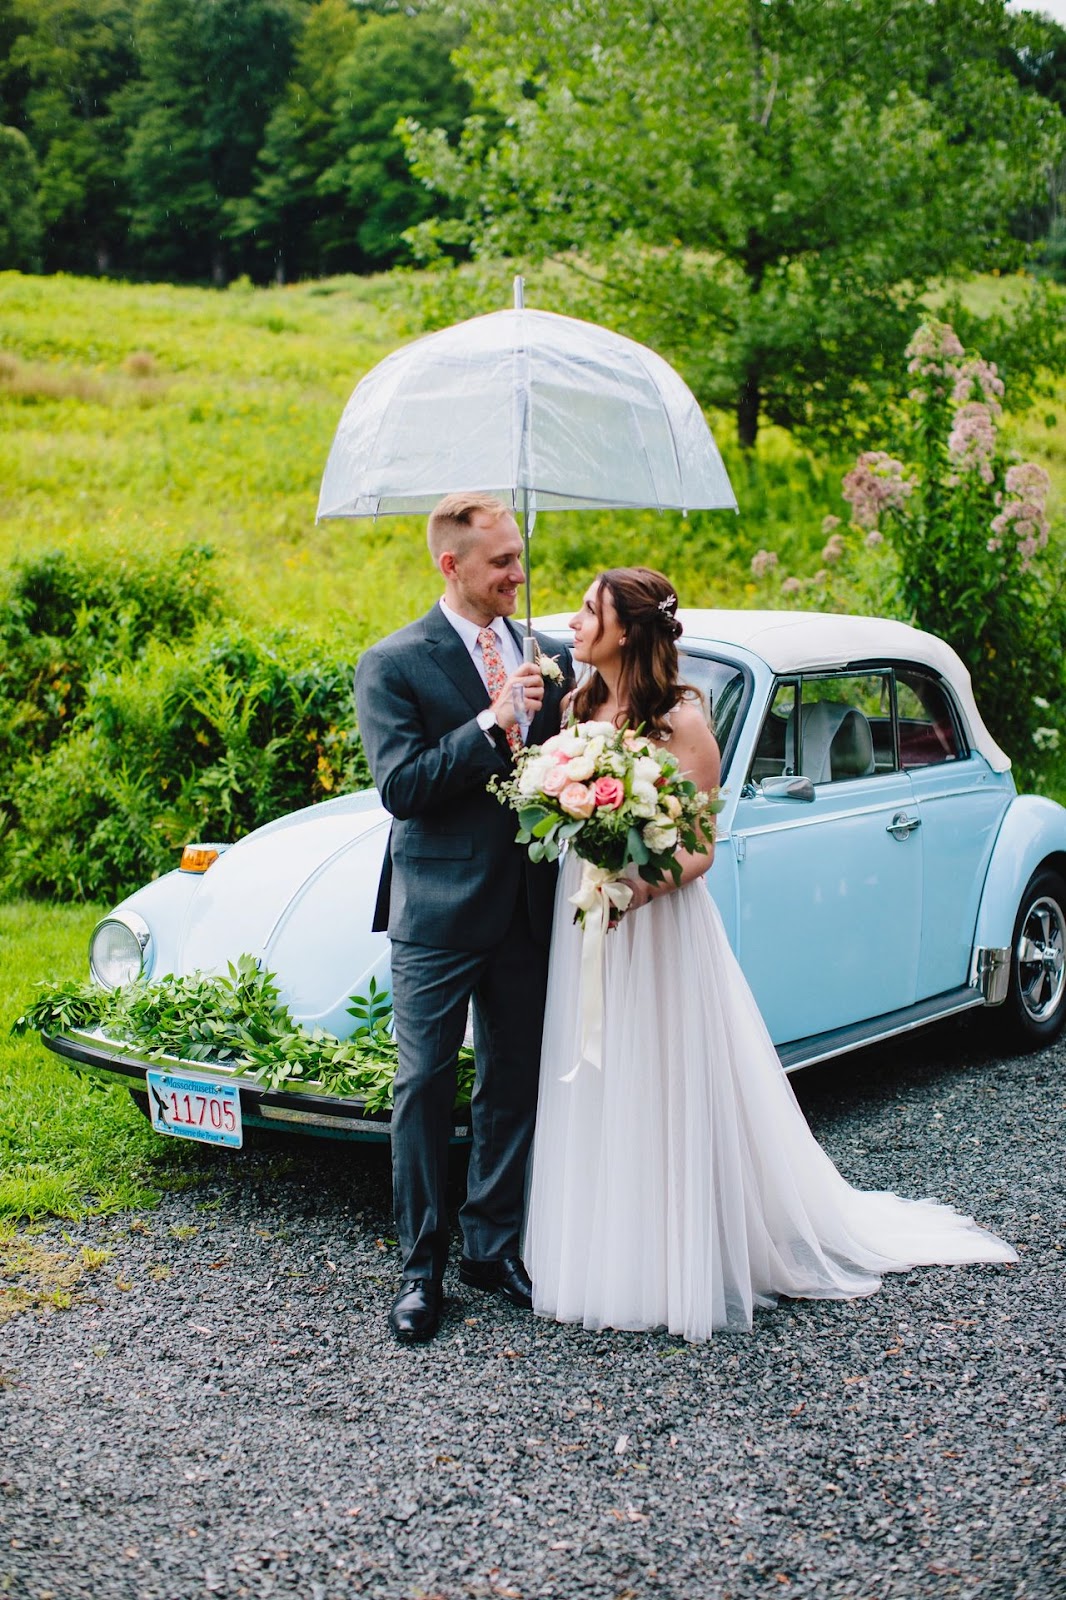 Bride and Groom under umbrella with a cool car behind them